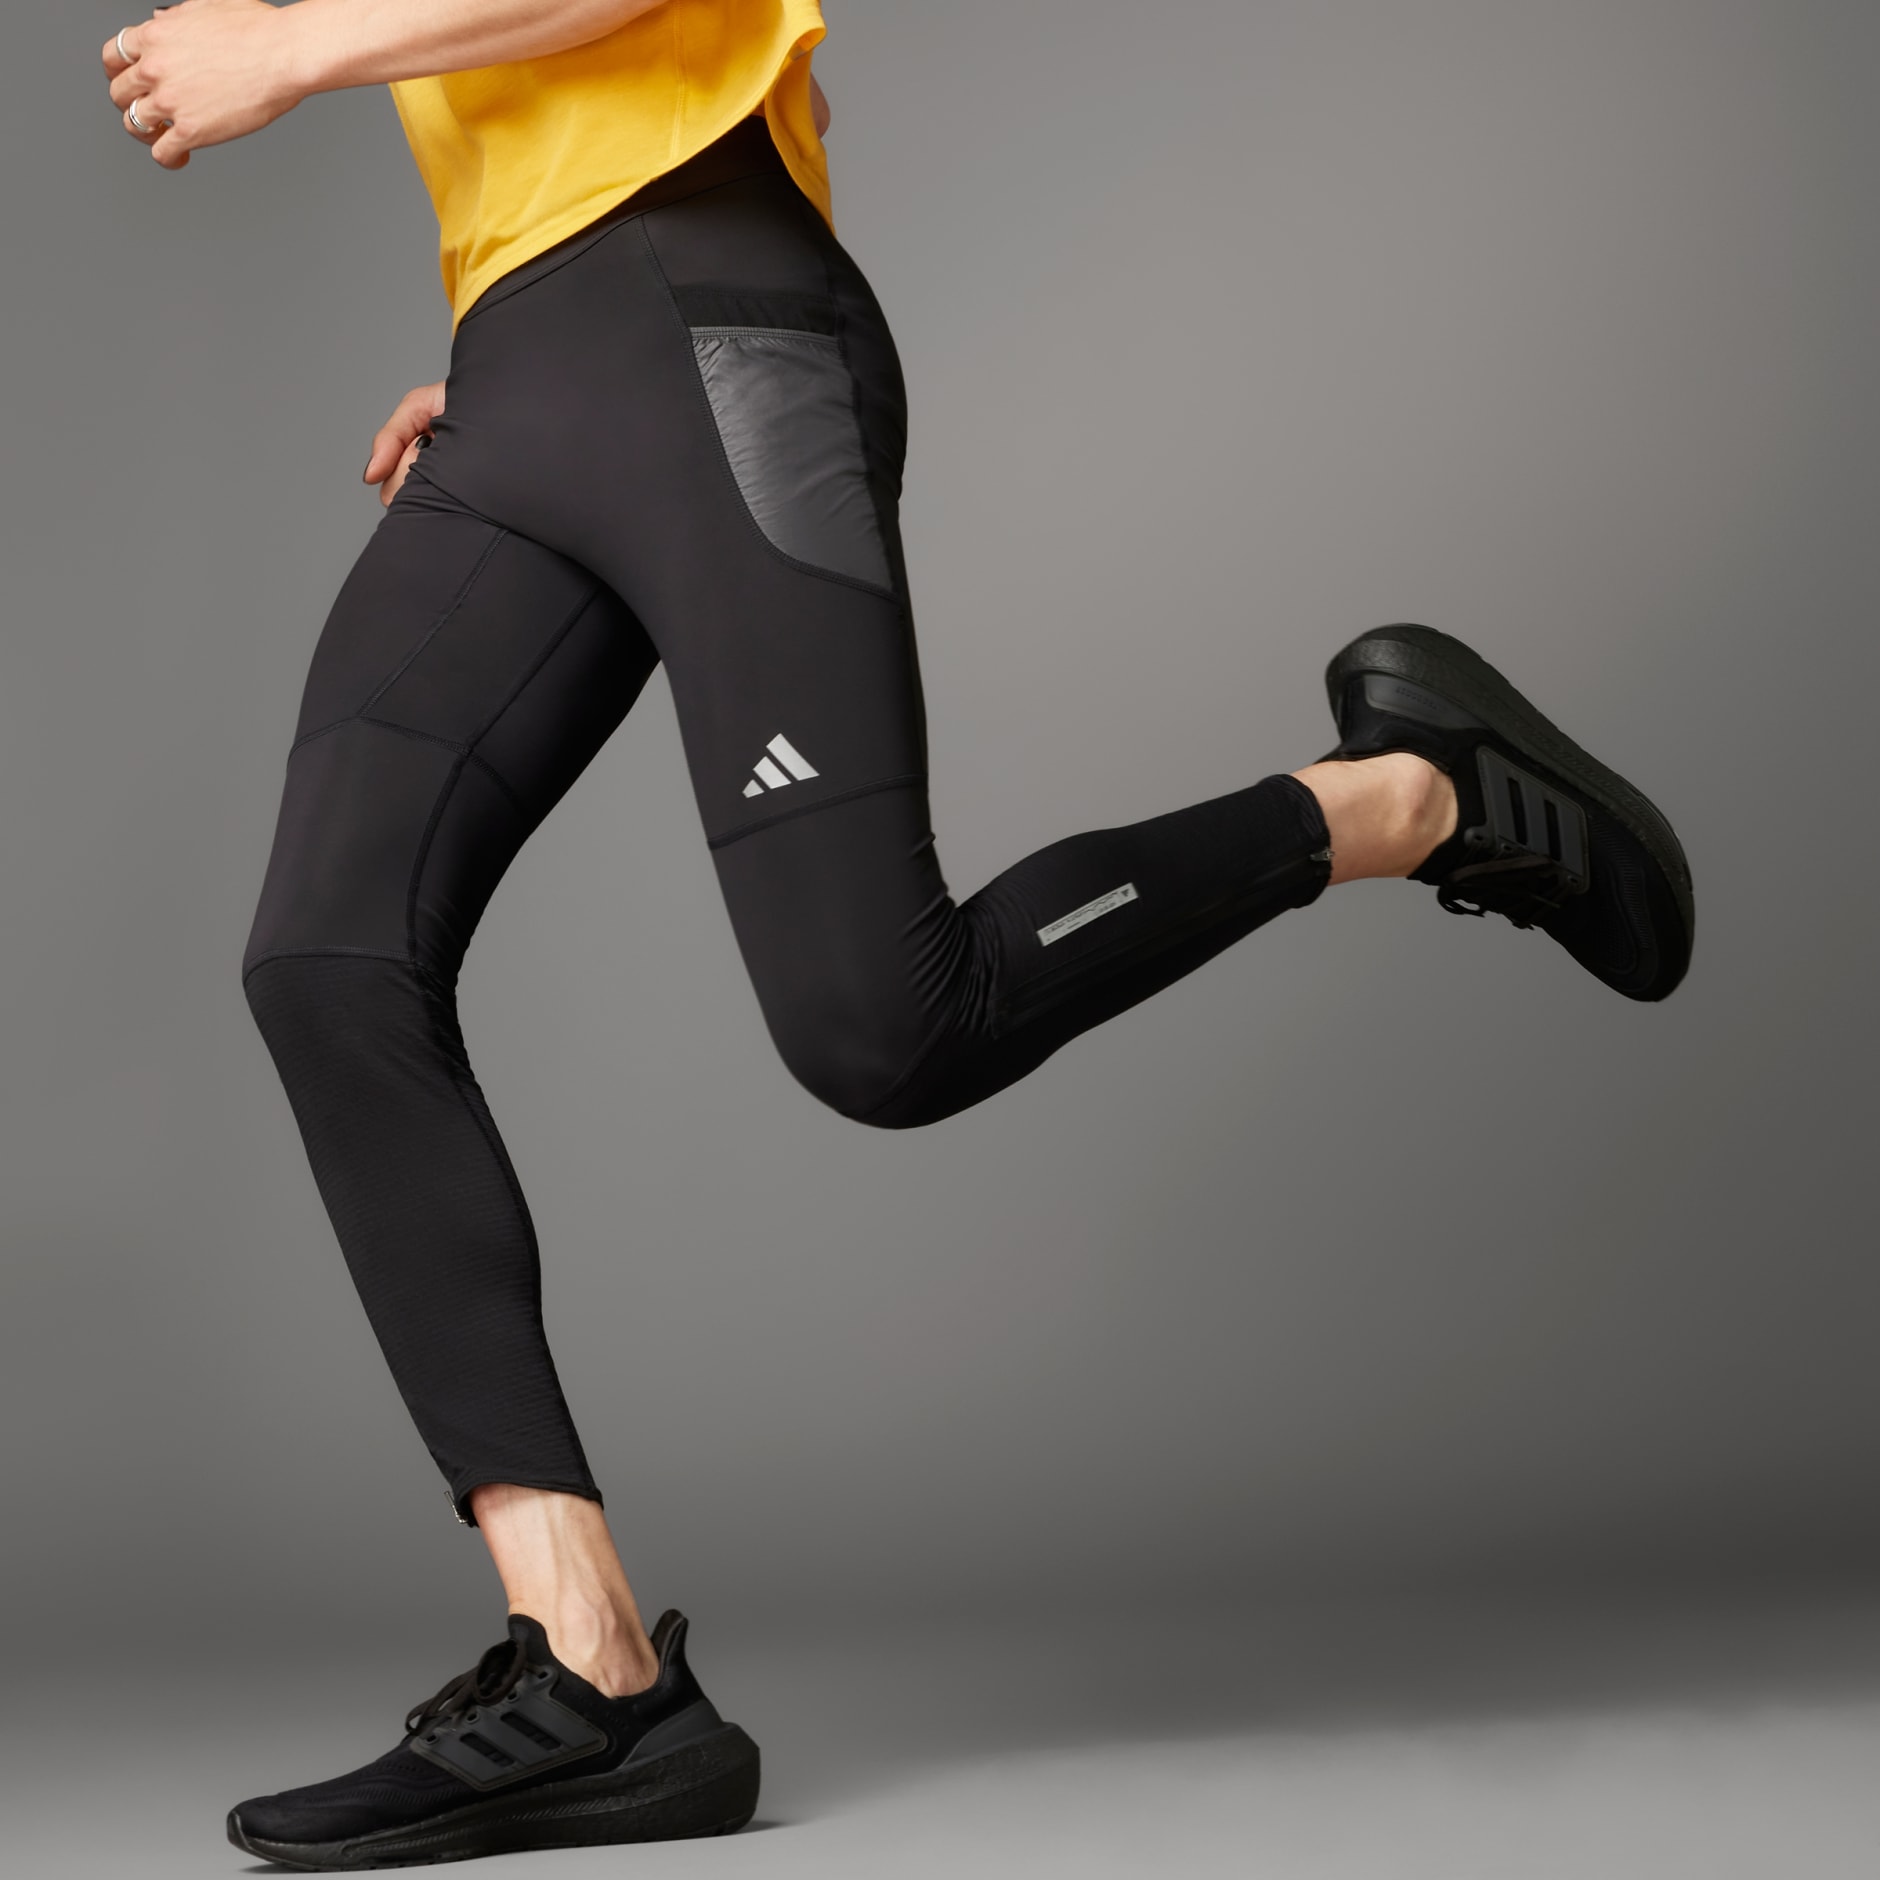 Women's Clothing - Ultimate Running Conquer the Elements Body